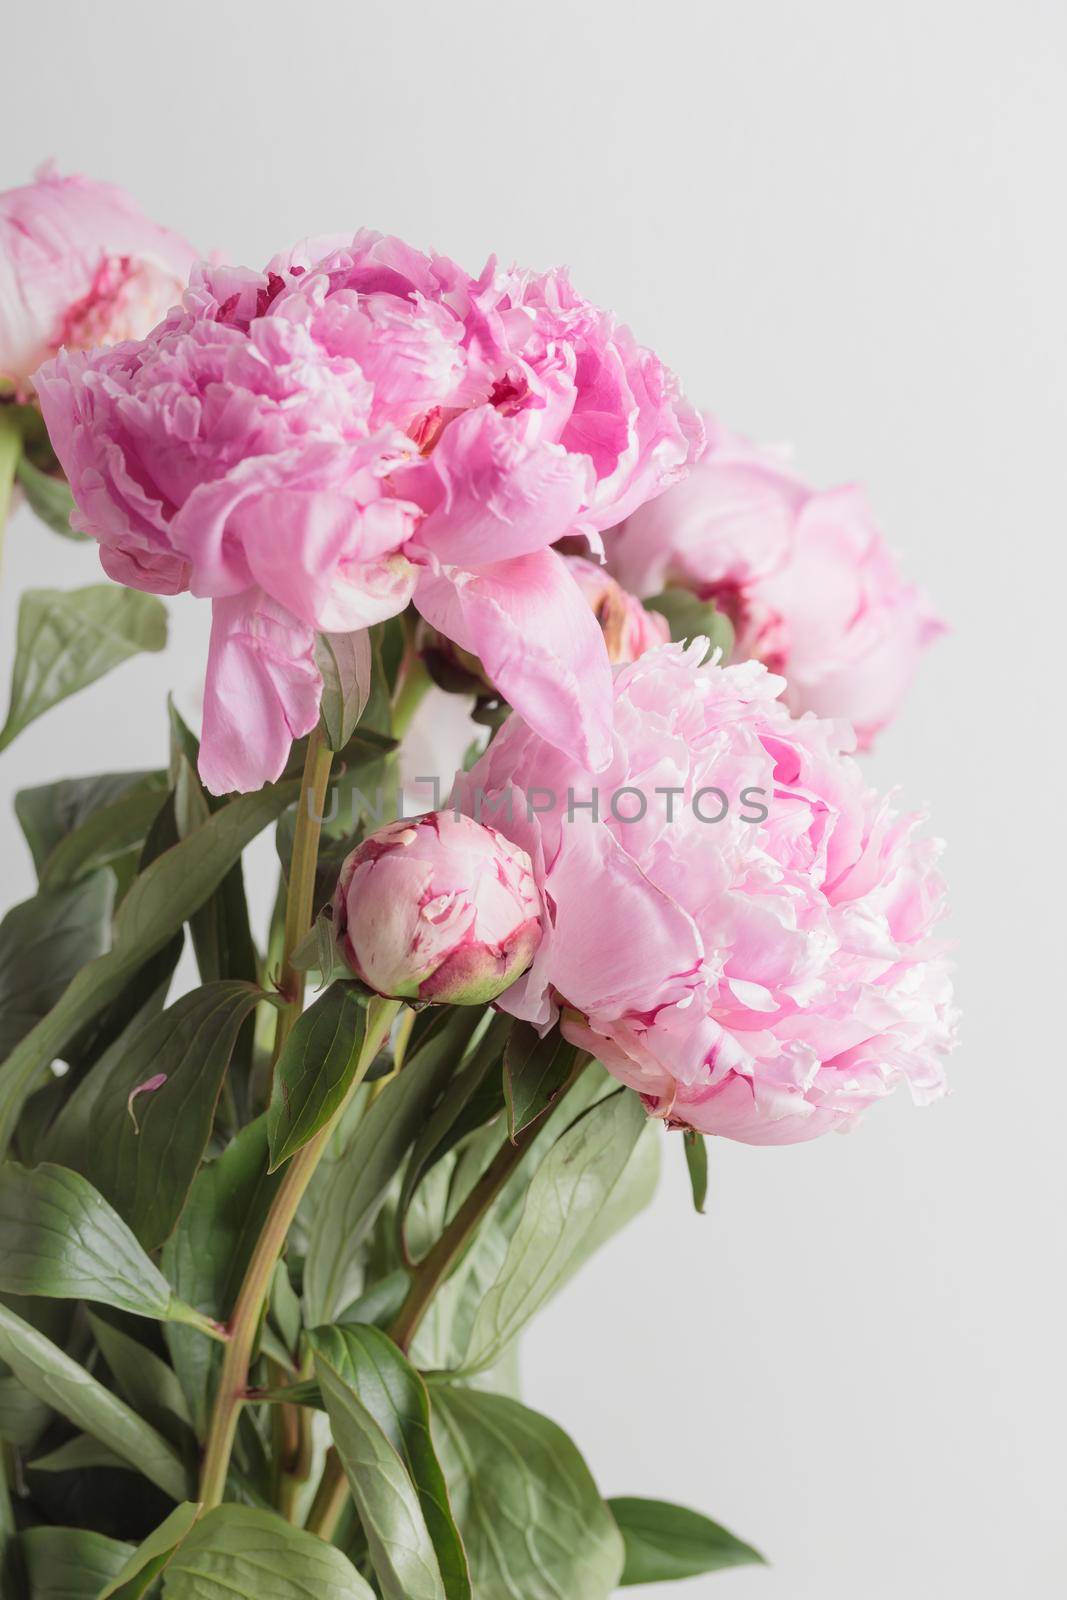 Beautiful bunch of fresh Pastel colored Pink peonies in full bloom in vase with white background by Gudzar